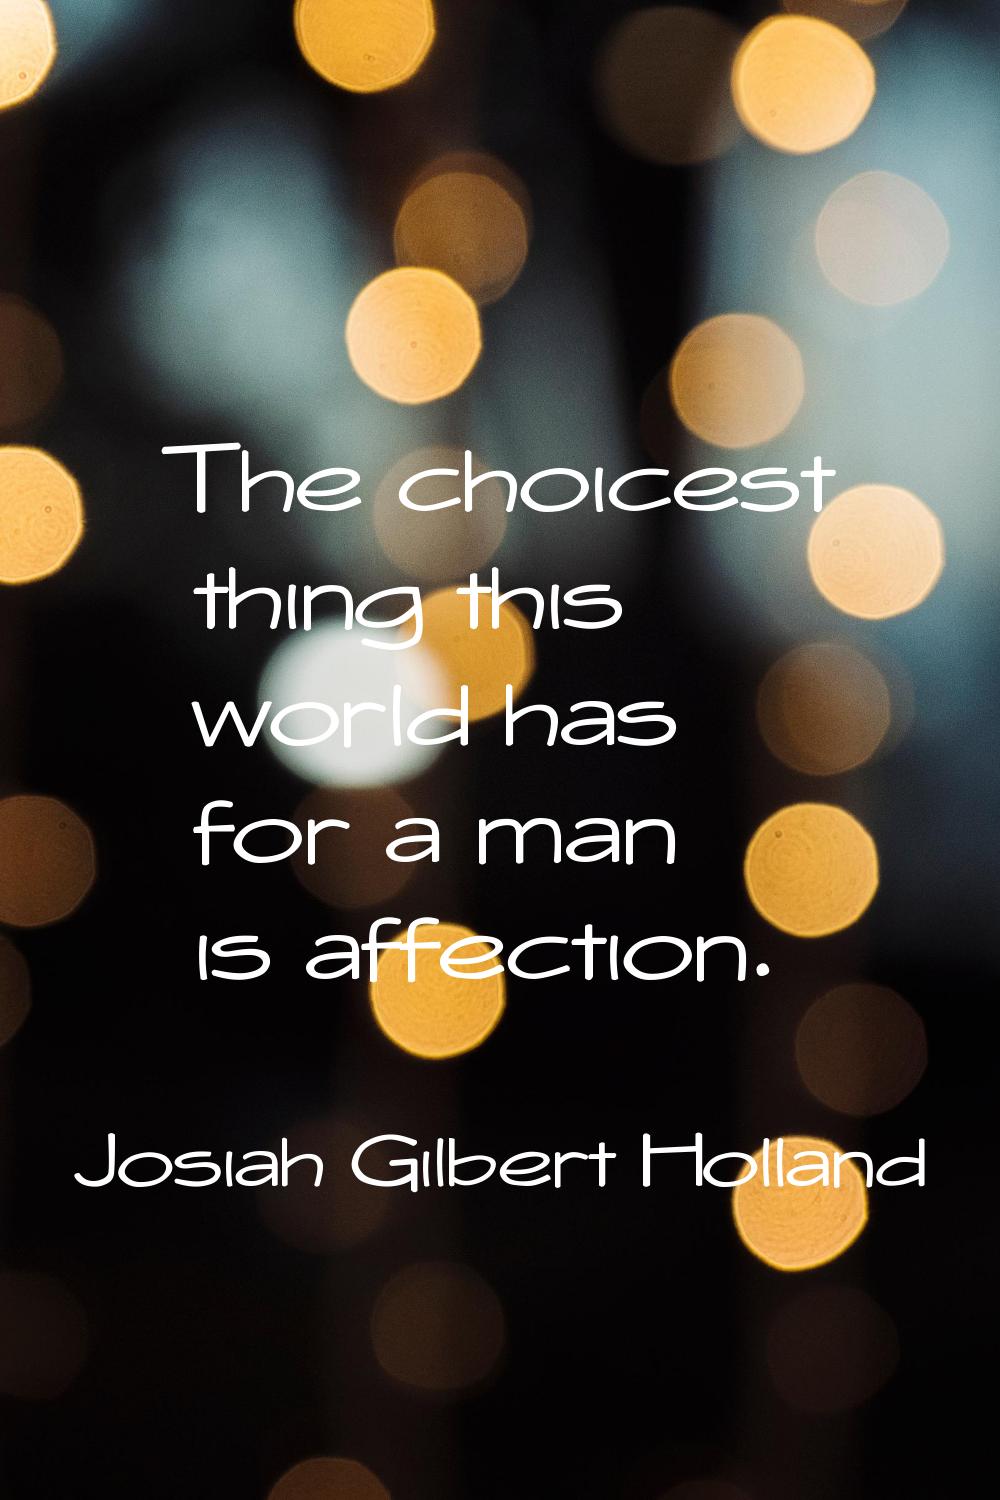 The choicest thing this world has for a man is affection.